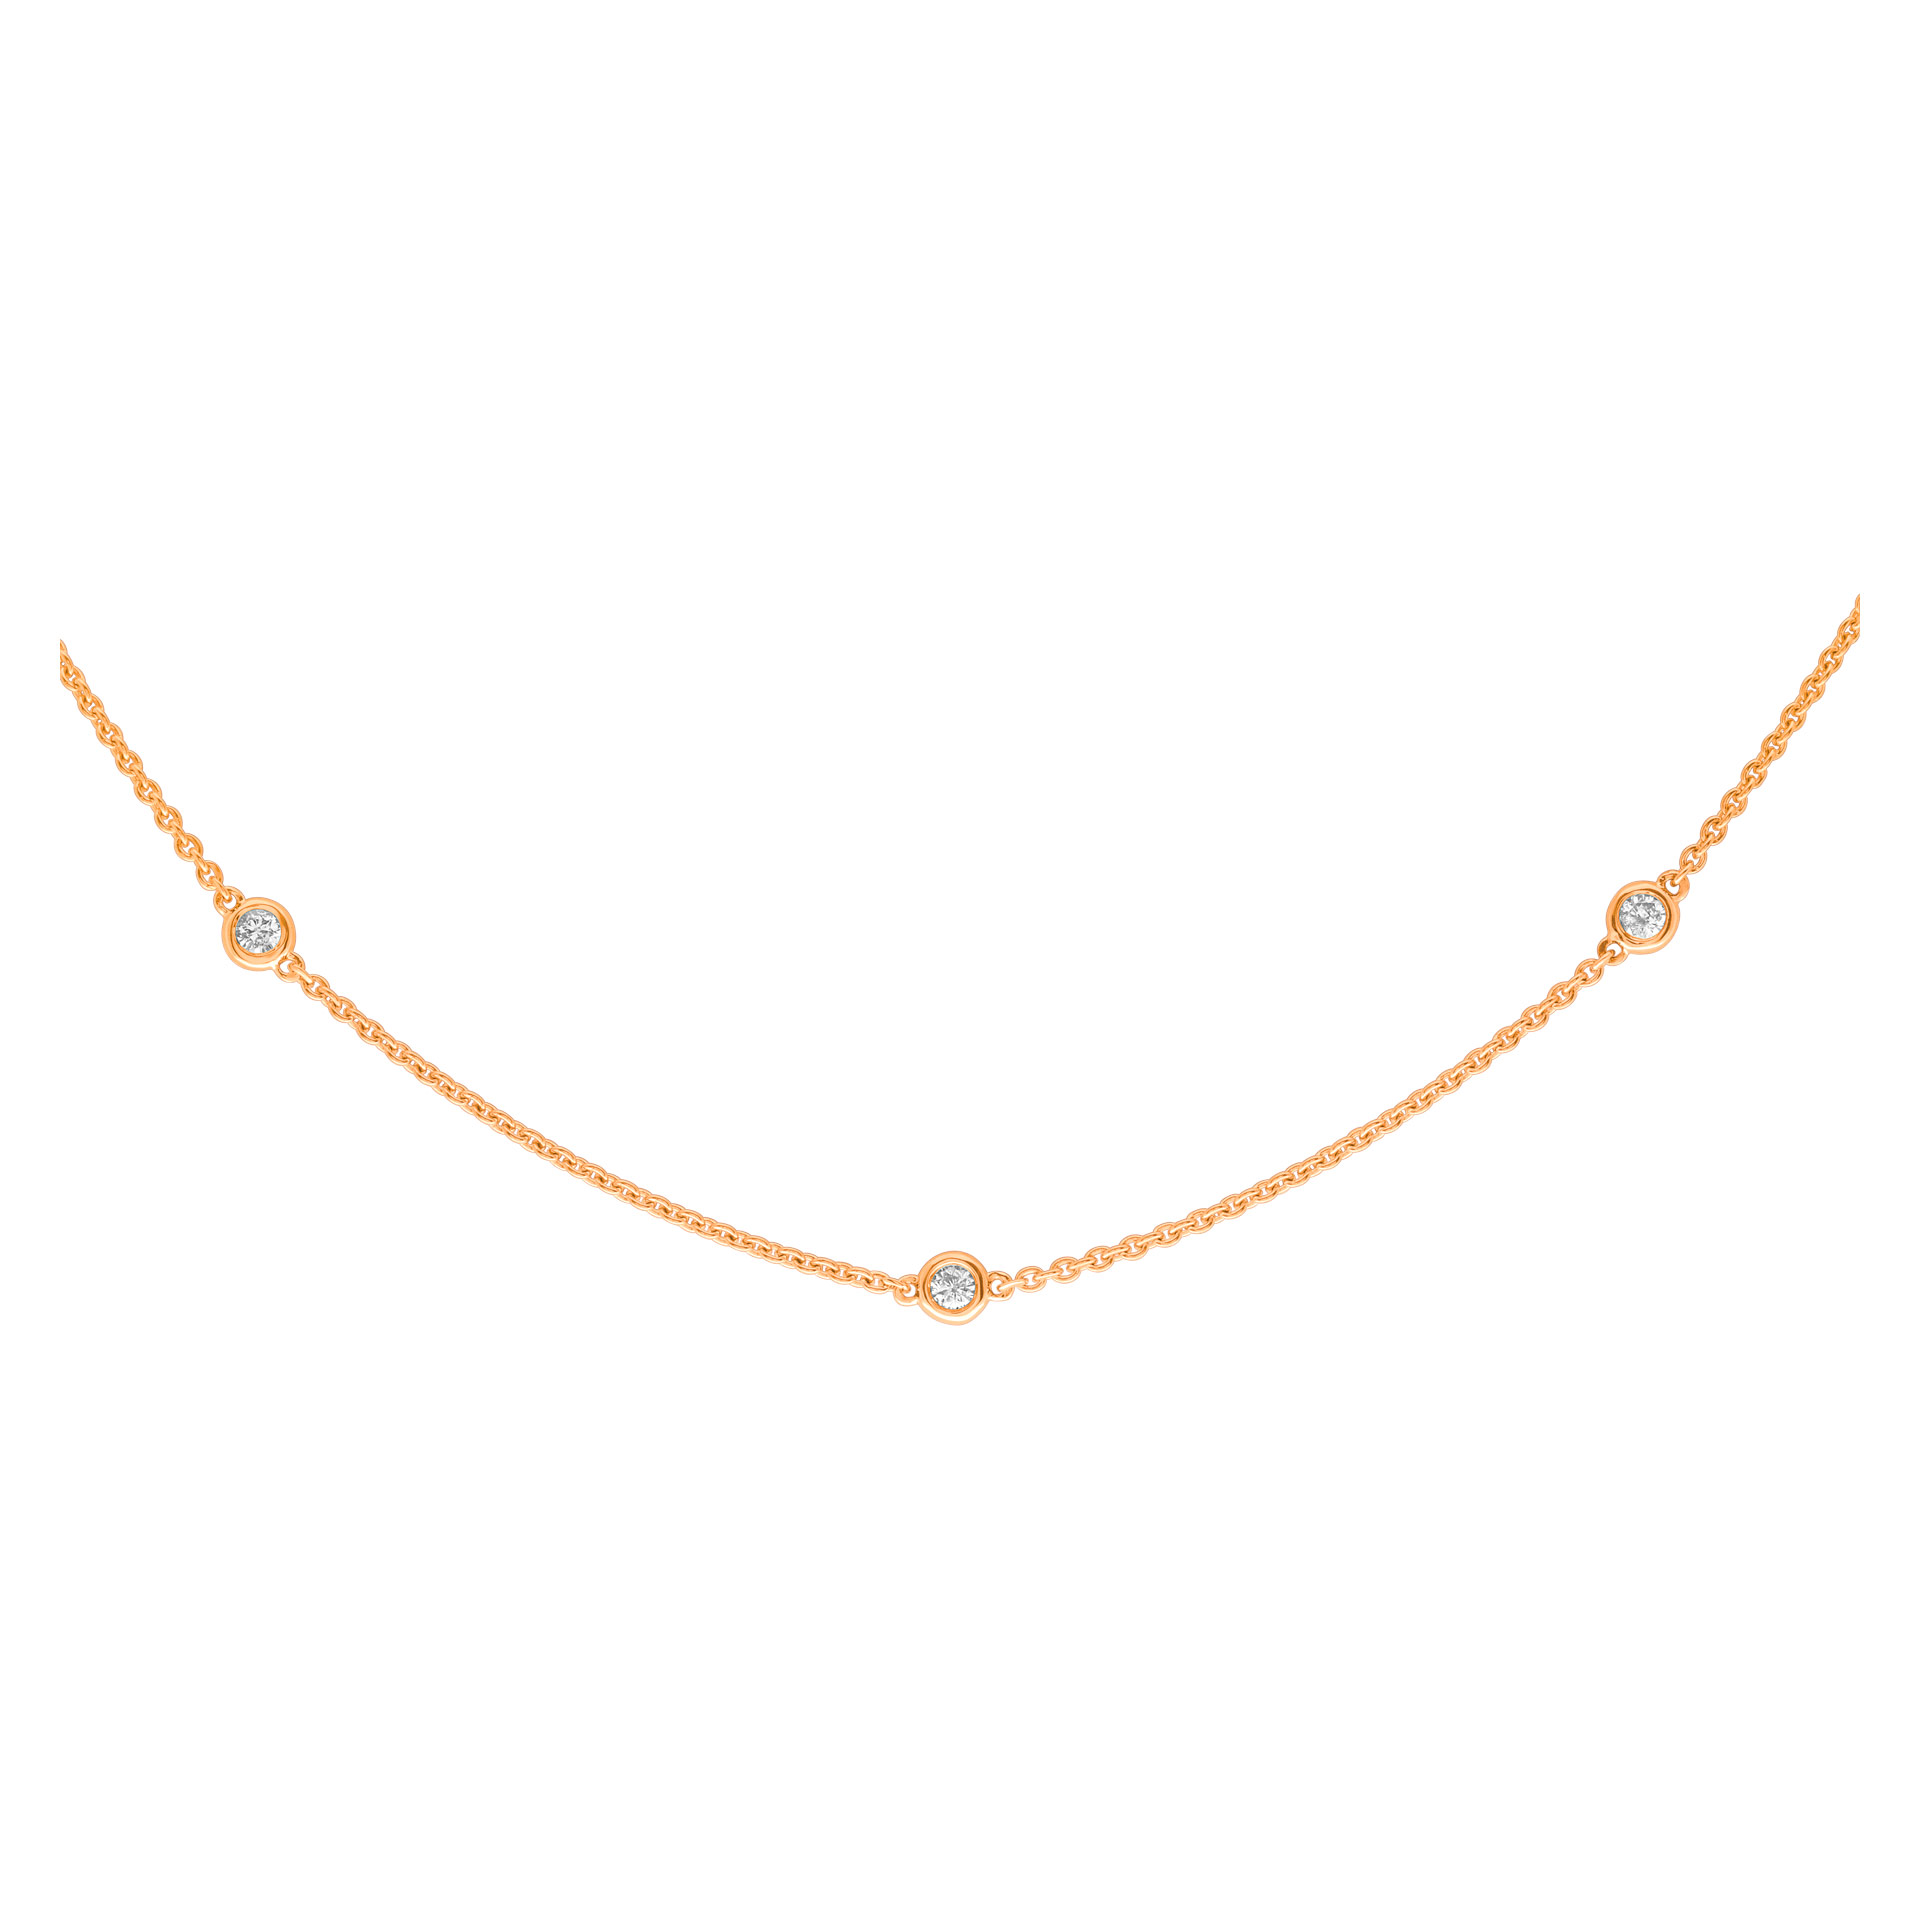 Diamonds by the yard 14k rose gold 1.05 carats in diamonds image 1